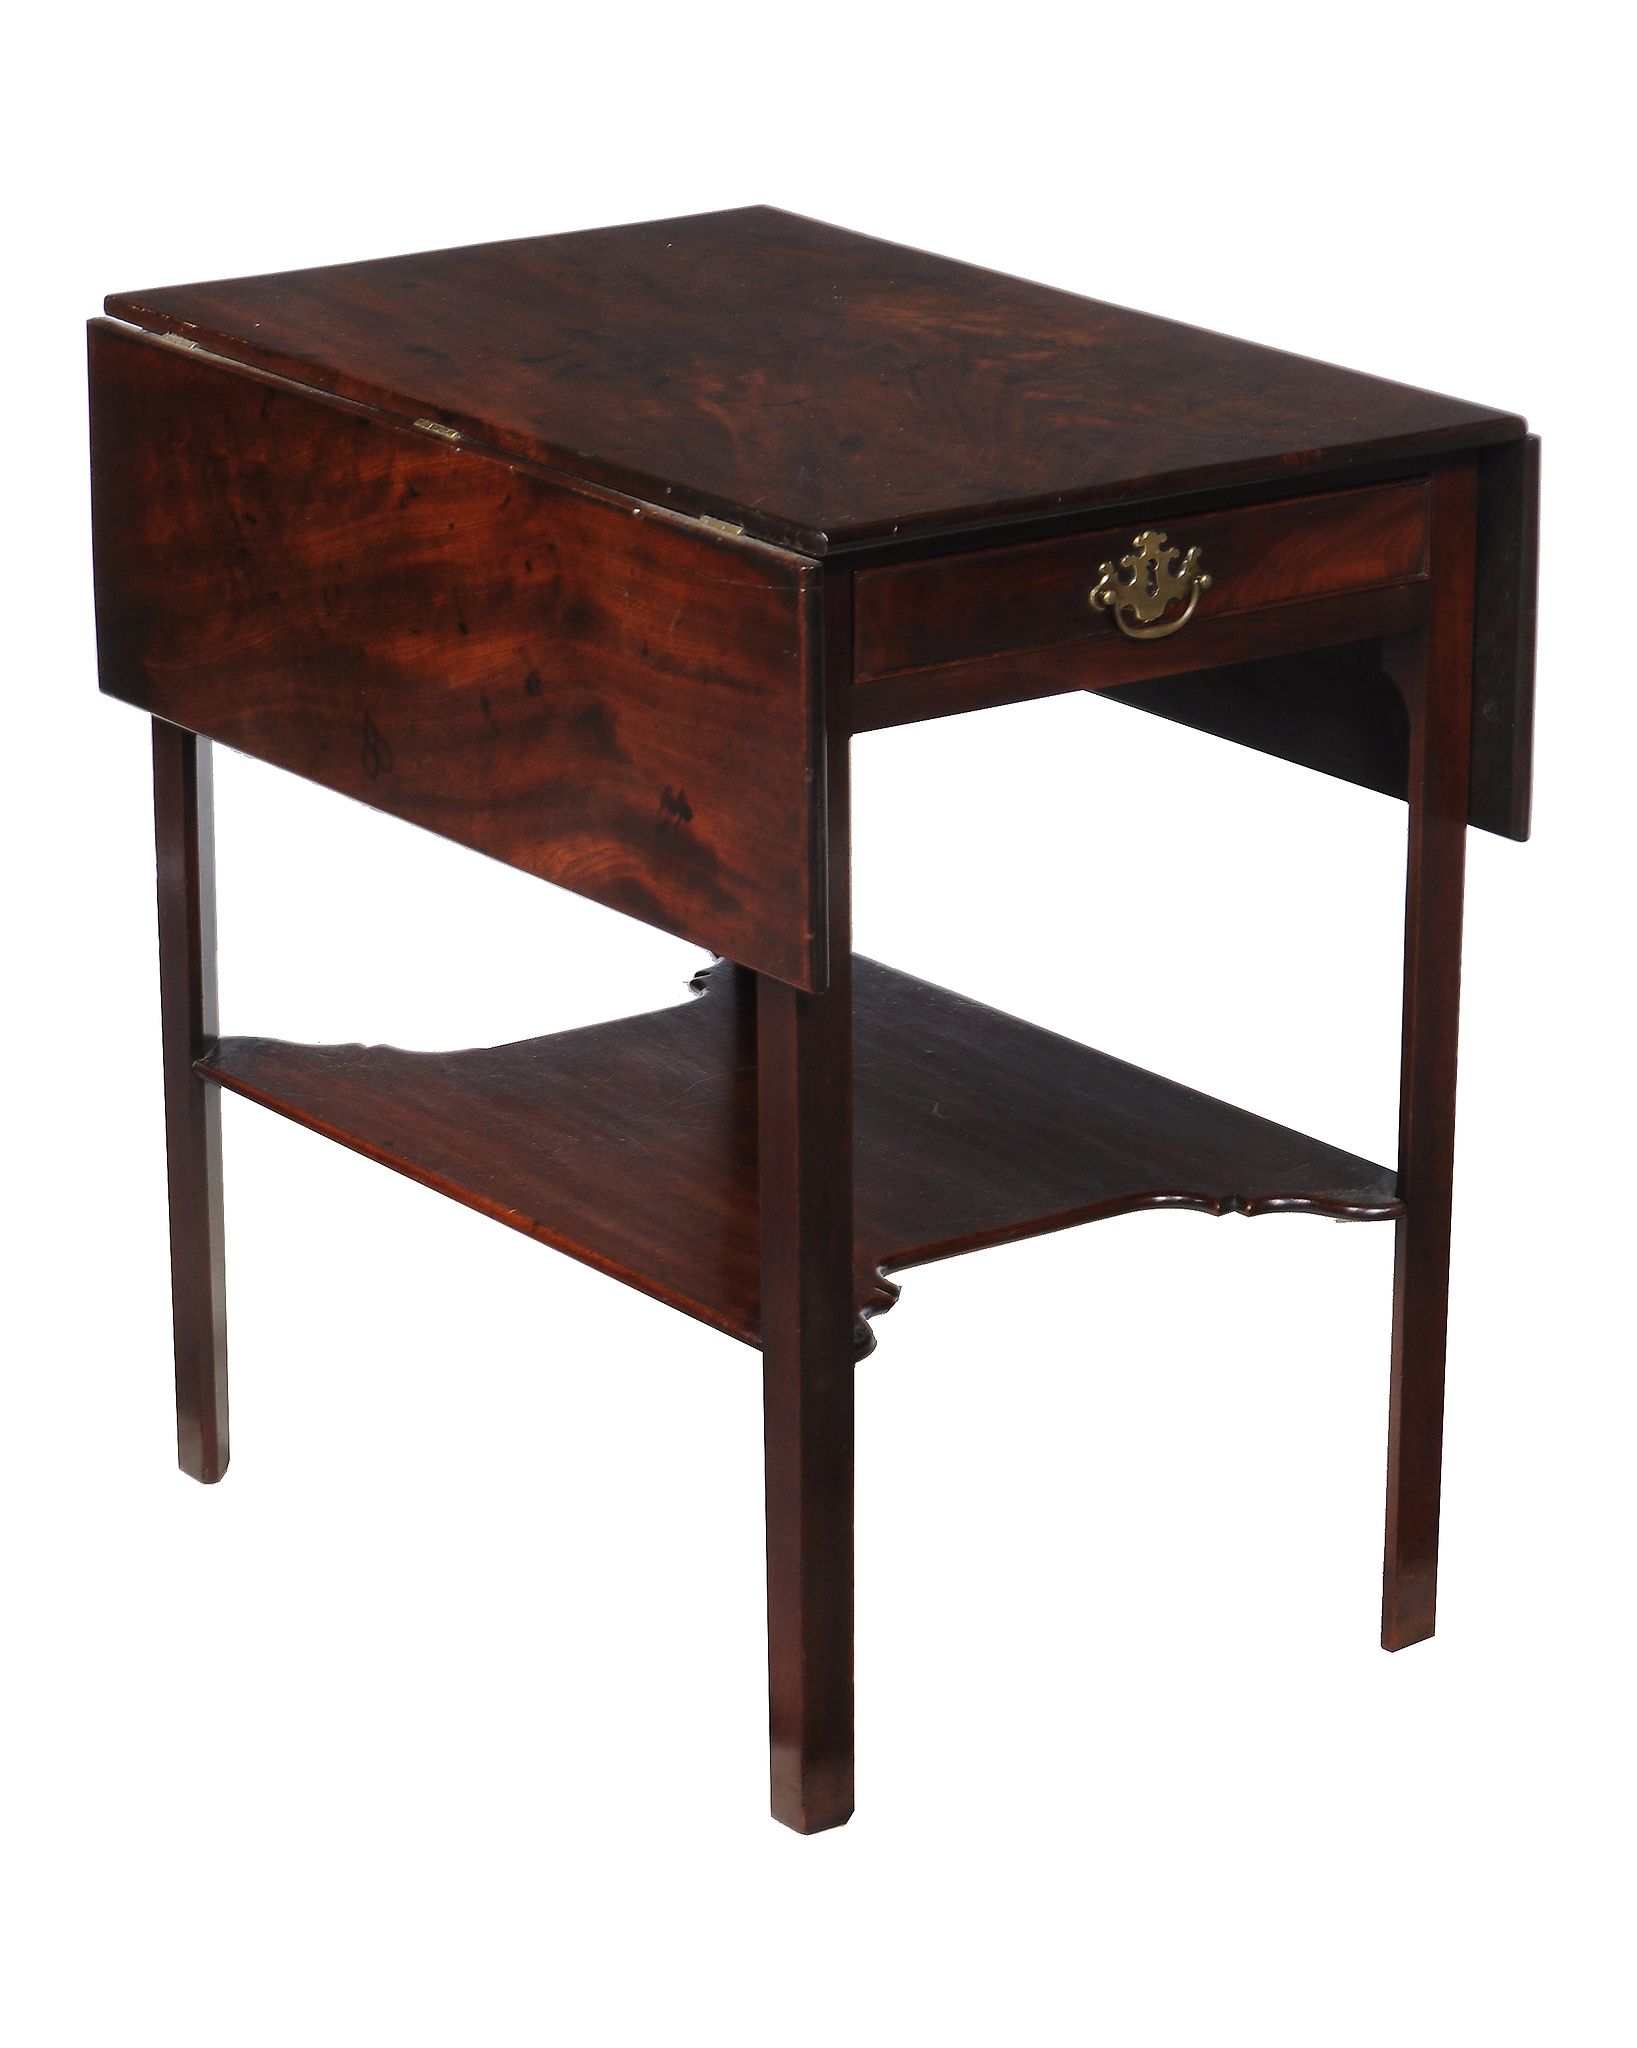 A George III mahogany Pembroke table, circa 1770, in the manner of Thomas Chippendale, the - Image 4 of 4